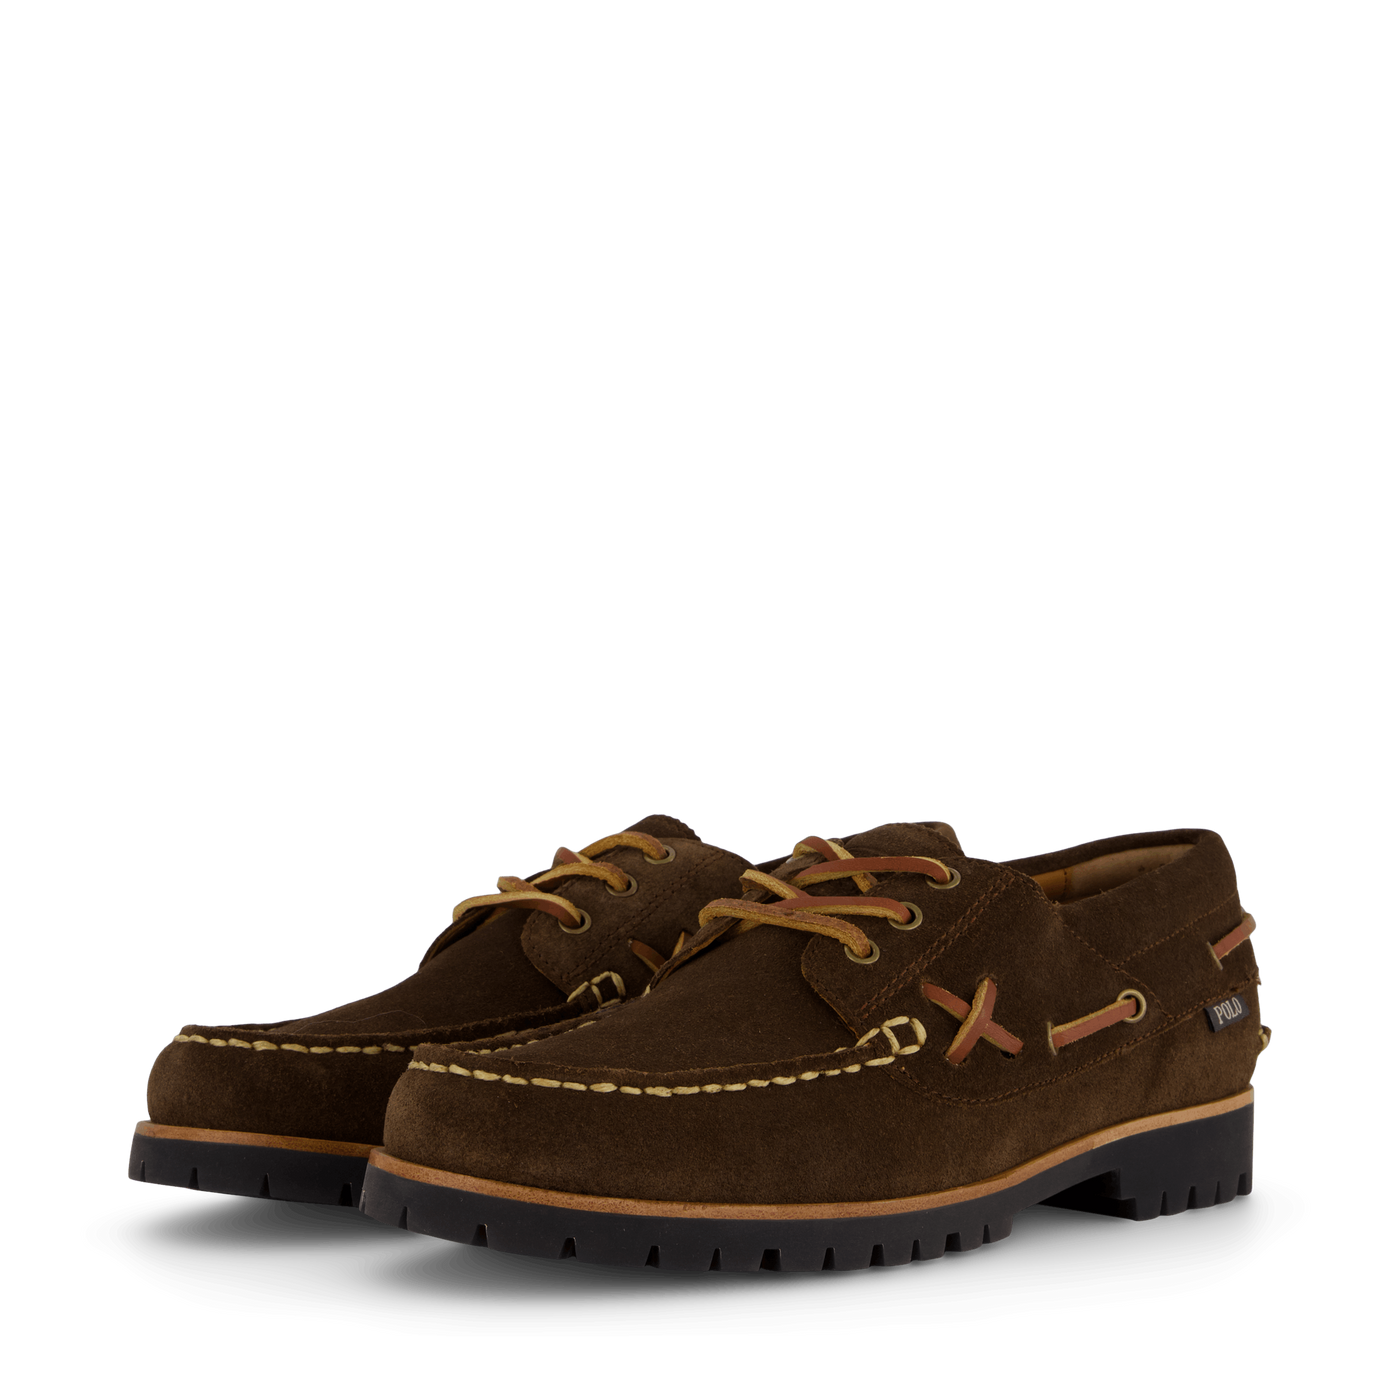 Ranger Suede Boat Shoe Chocolate Brown